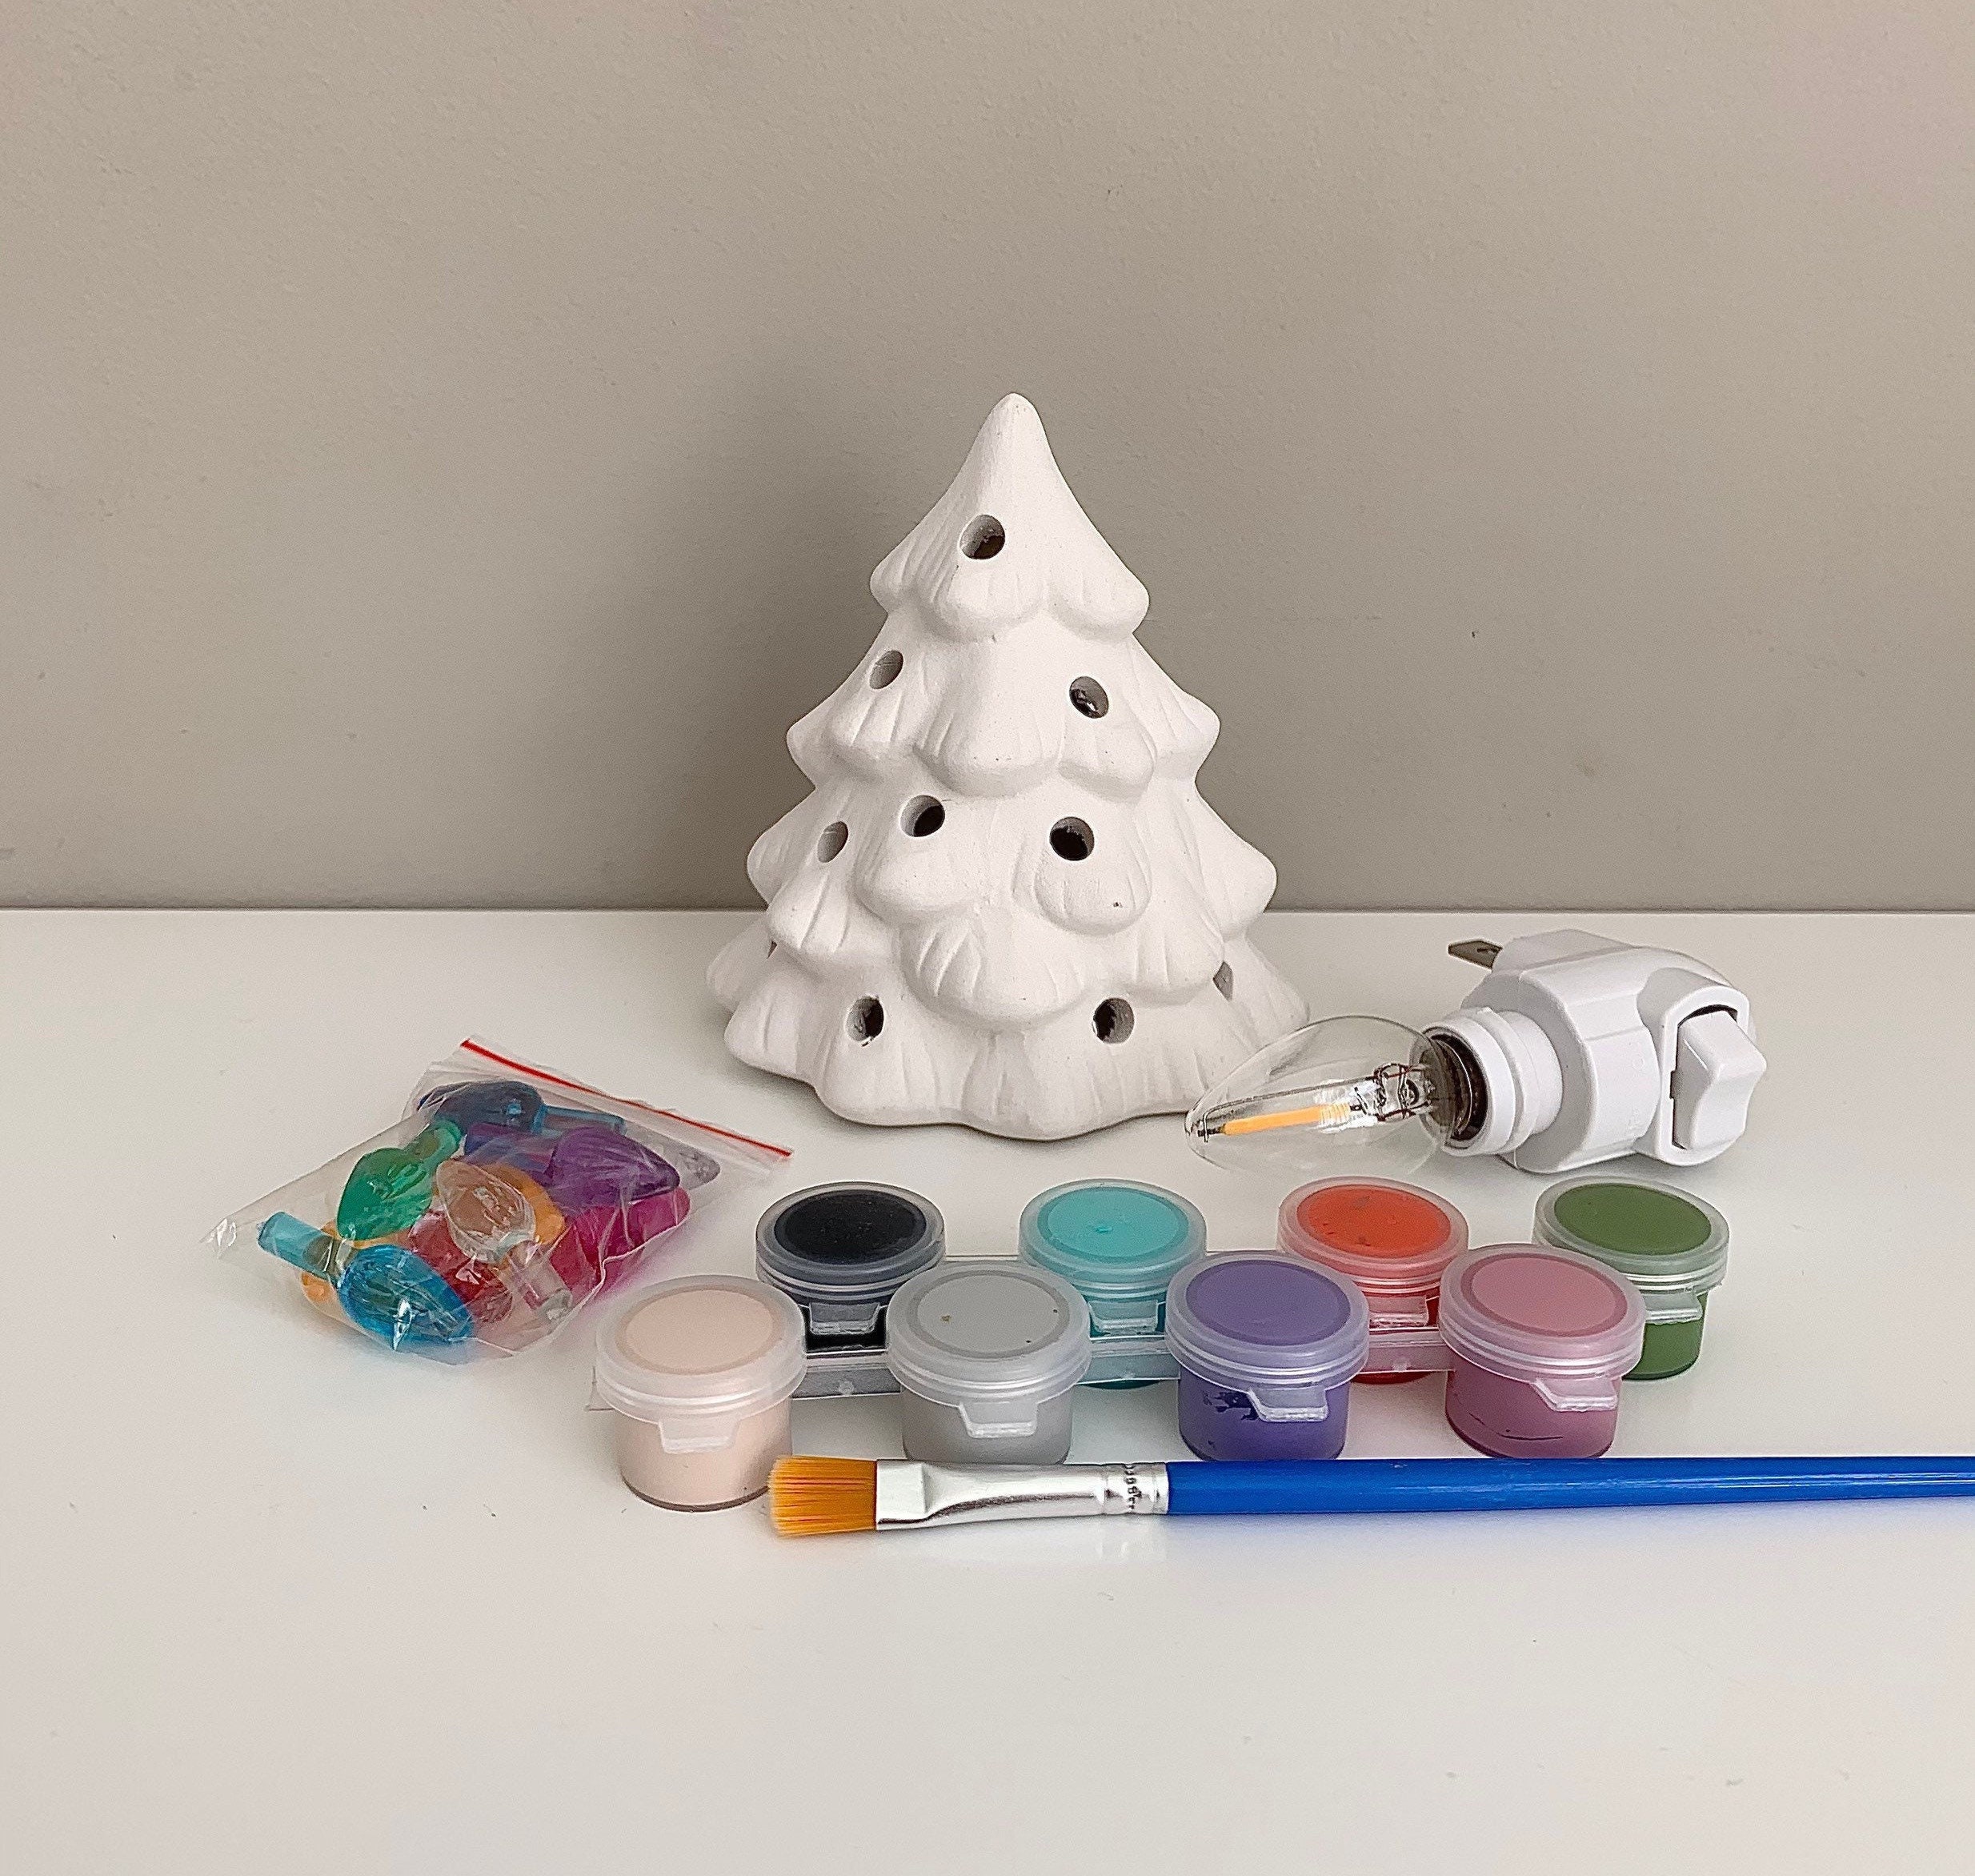 Set of 6 Ceramic Christmas Santa Snowman Tree Figurines Paint Craft Kit  Unpainted Ceramics Plaster Keepsake for Kids Classroom Art Project Xmas  Favors Holiday Party Decoration Paint & Brushes Included